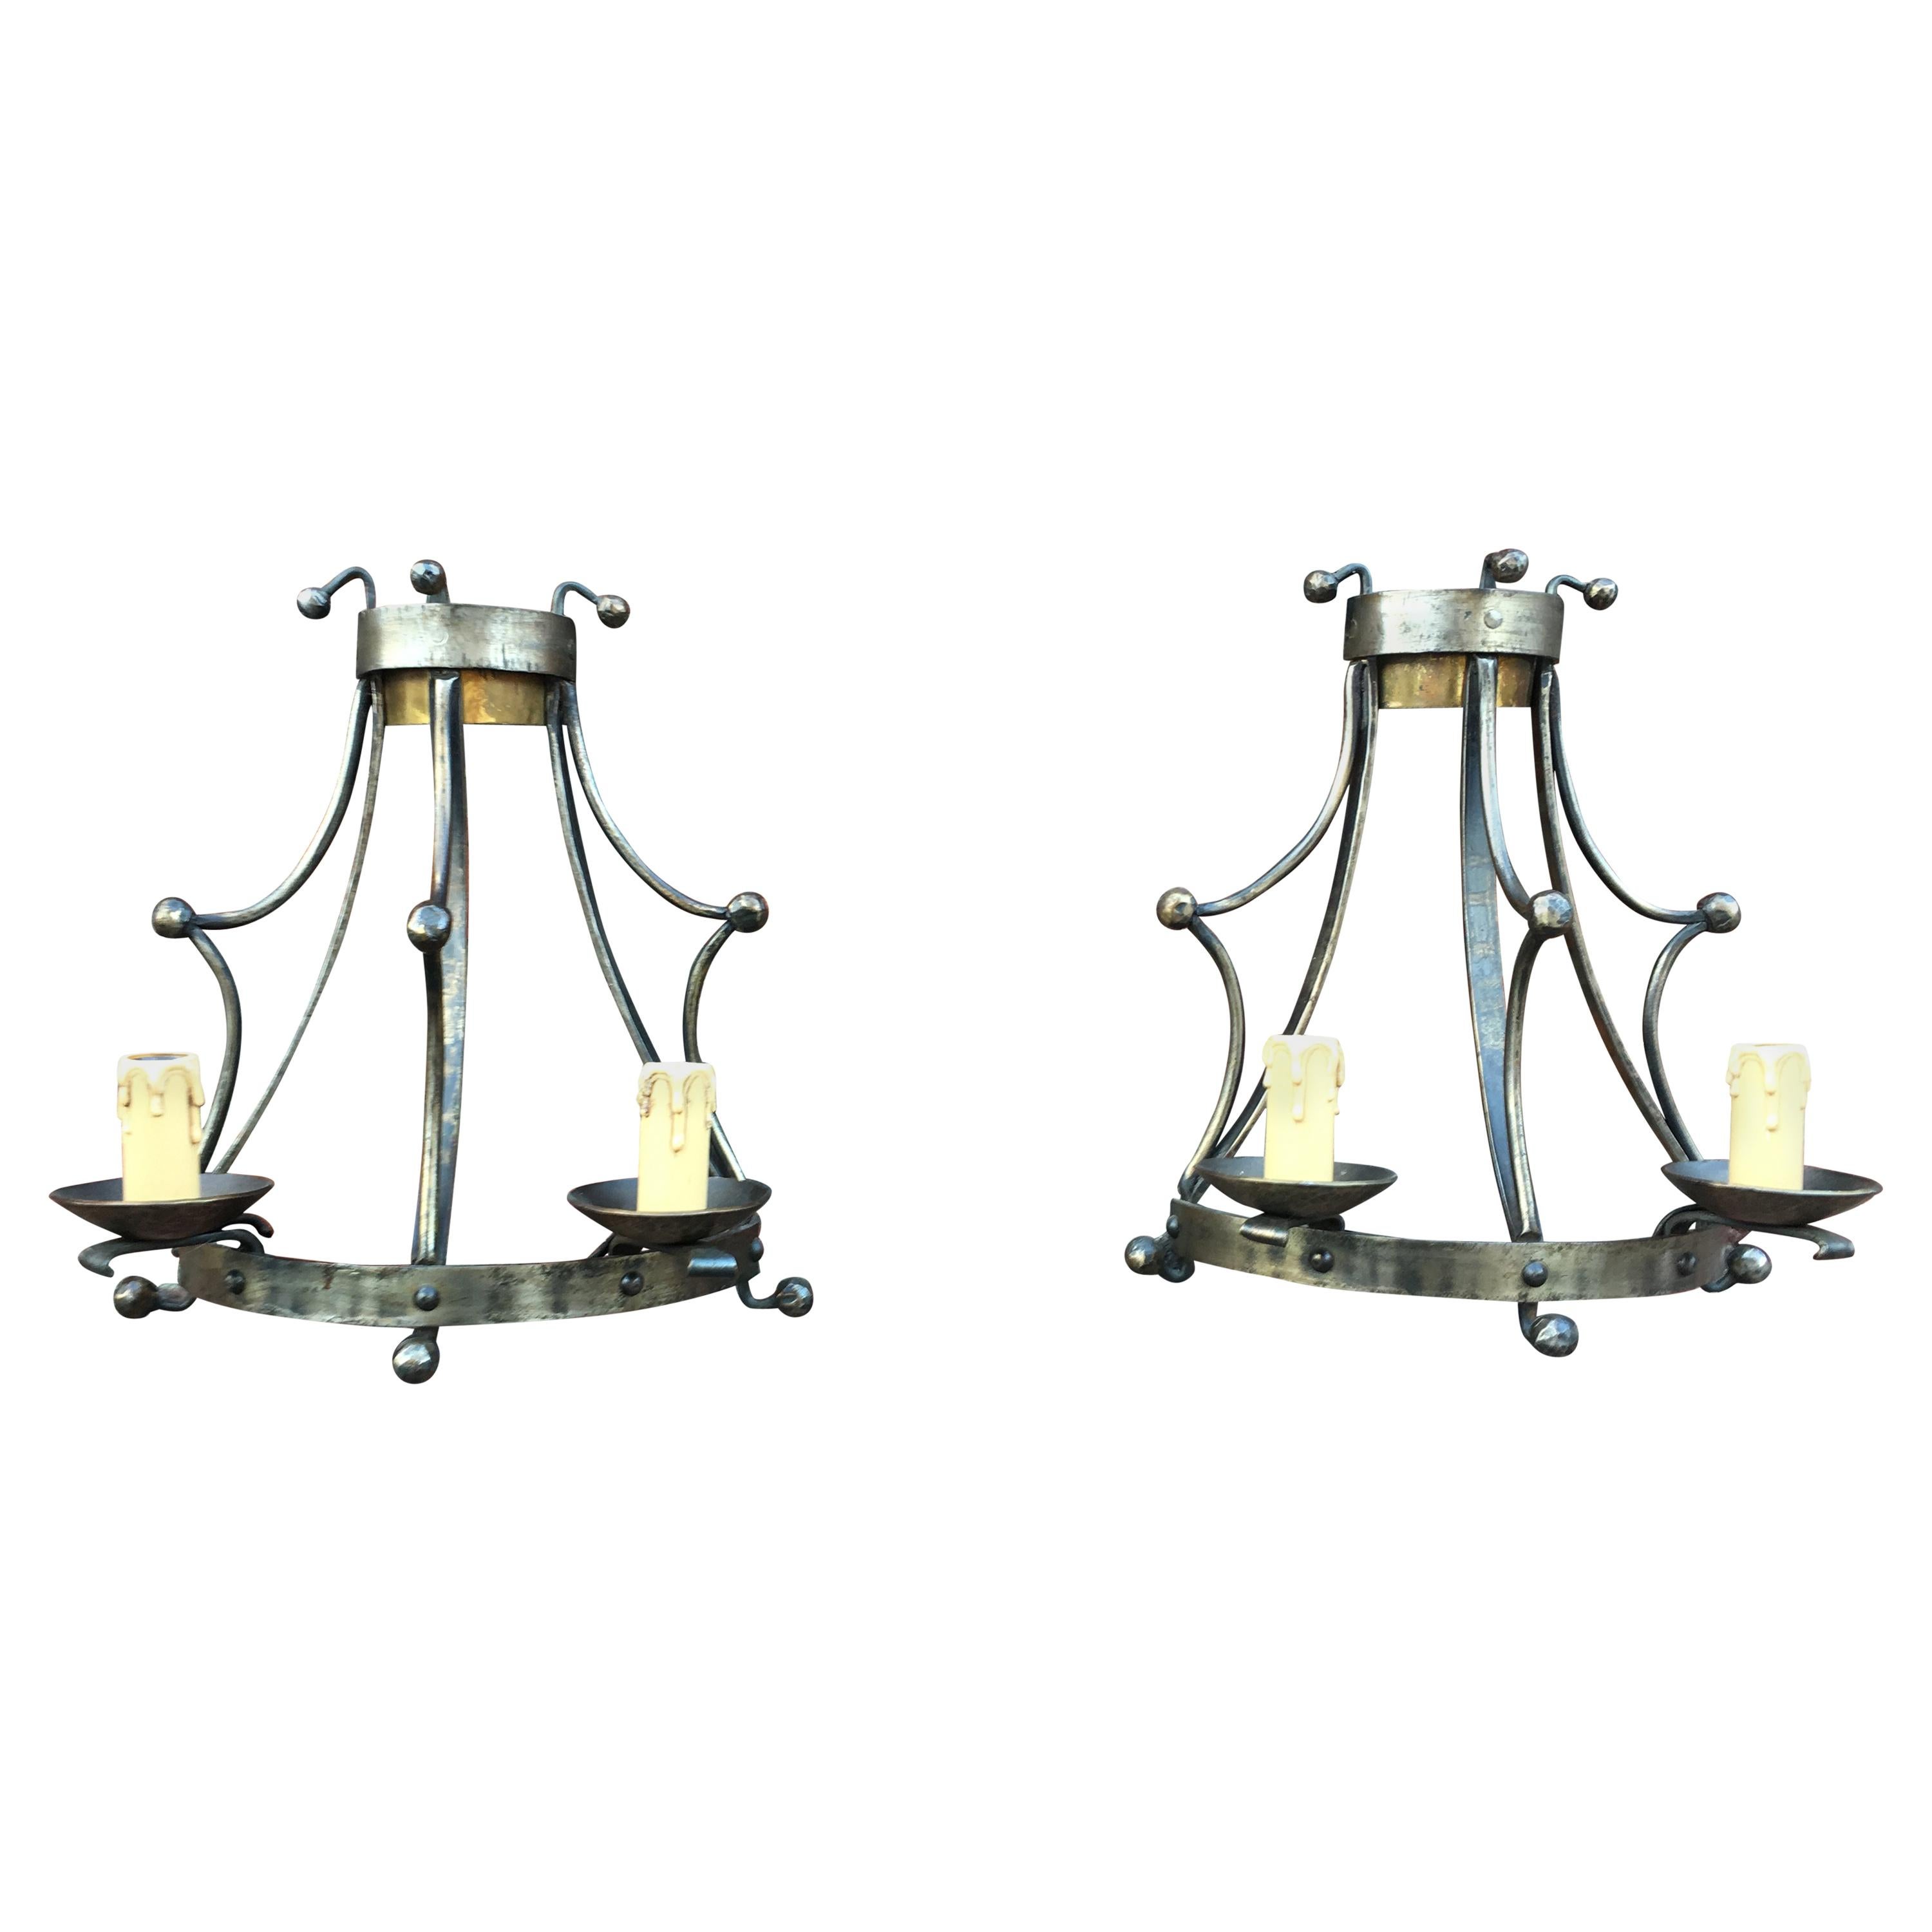 Pair of Sconces in the Style Art & Craft, circa 1950